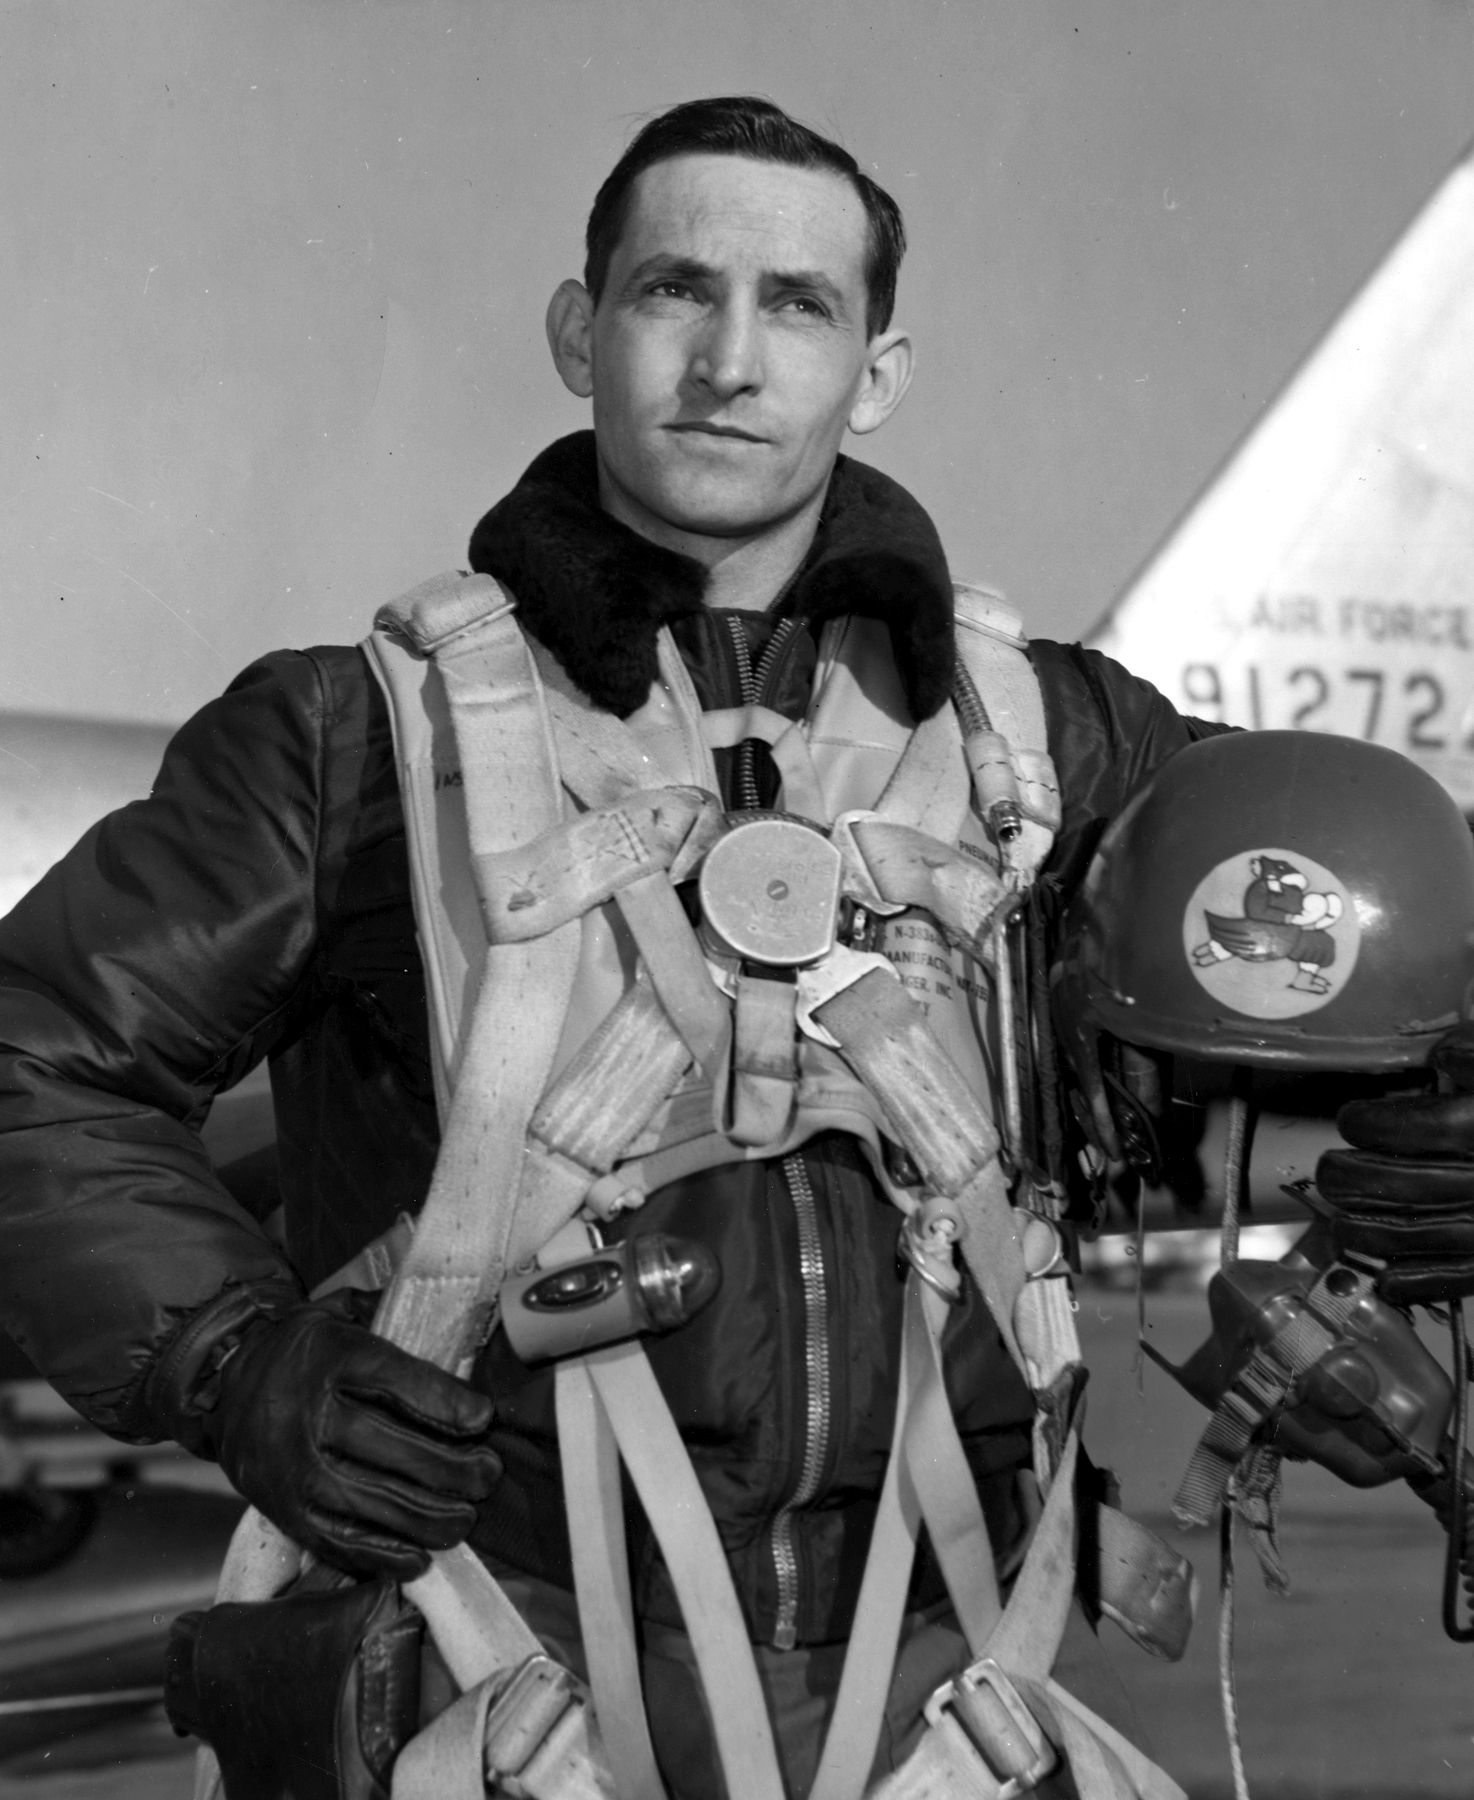 Major George Andrew Davis, Jr., United states Air Force, 334th Fighter Interceptor Squadron, 4th Fighter Interceptor Wing, Korea, 1951. (U.S. Air Force) 